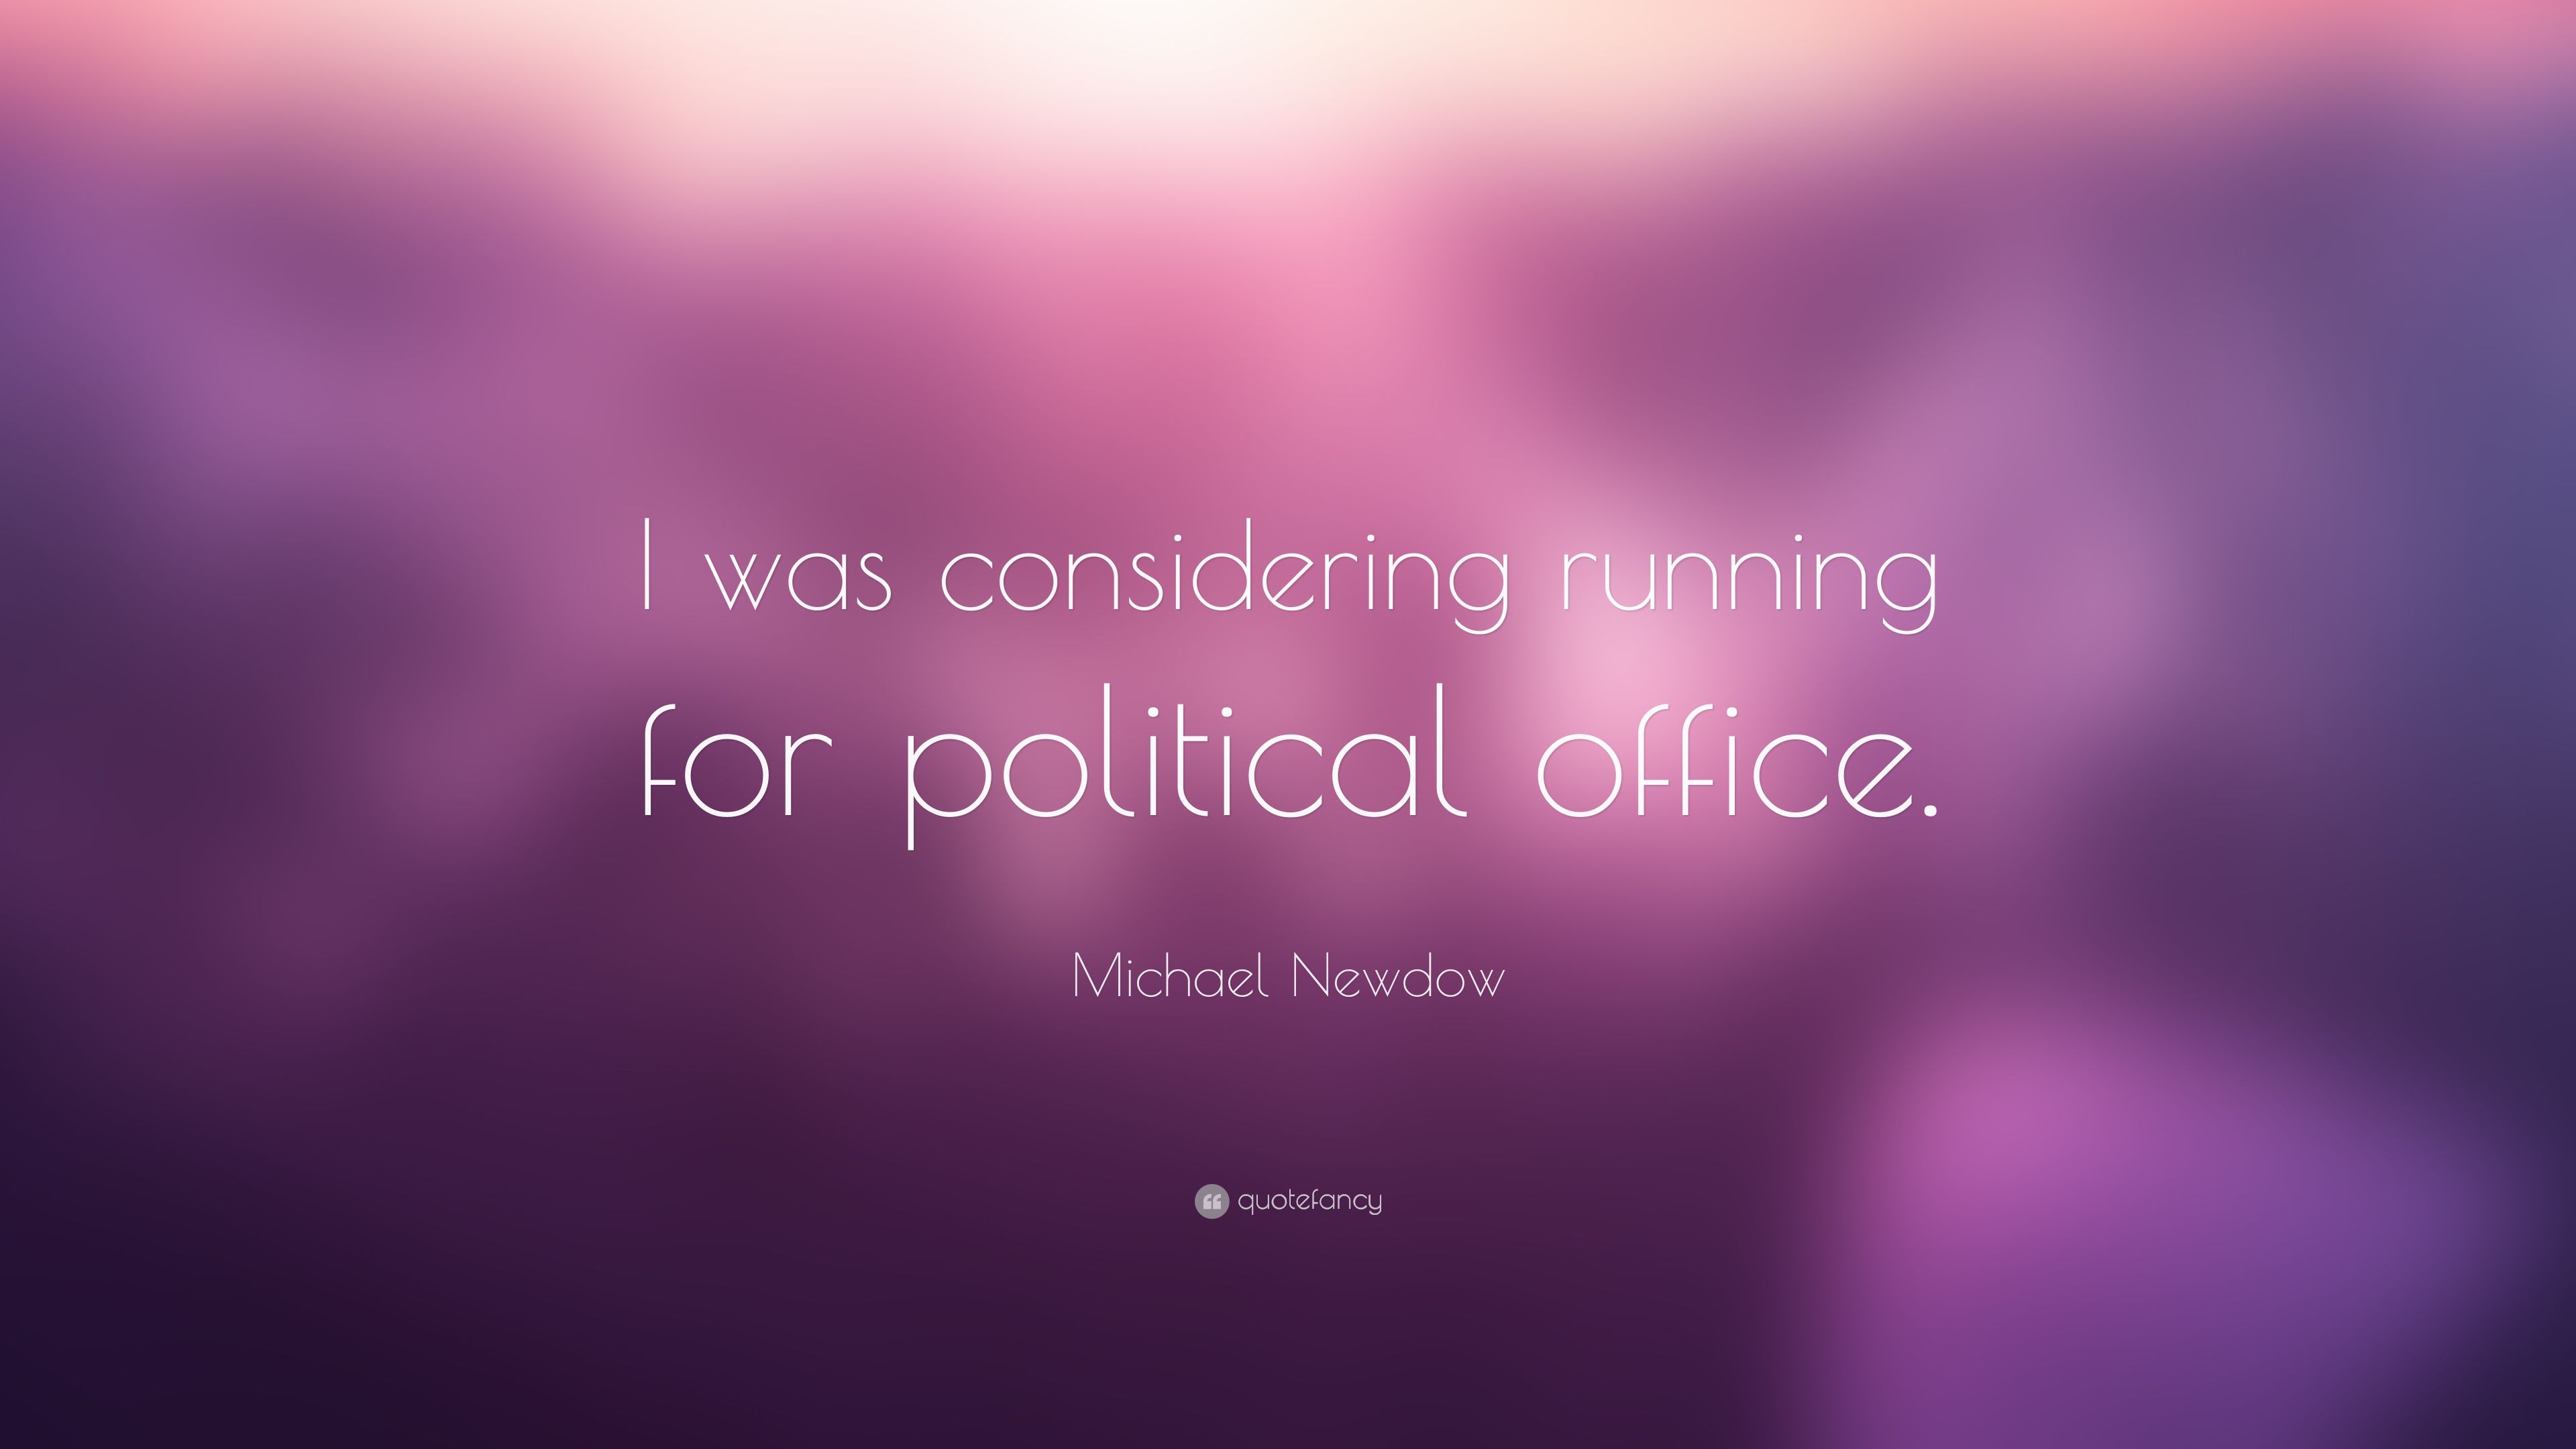 Michael Newdow Quote: “I was considering running for political office.” (7 wallpaper)